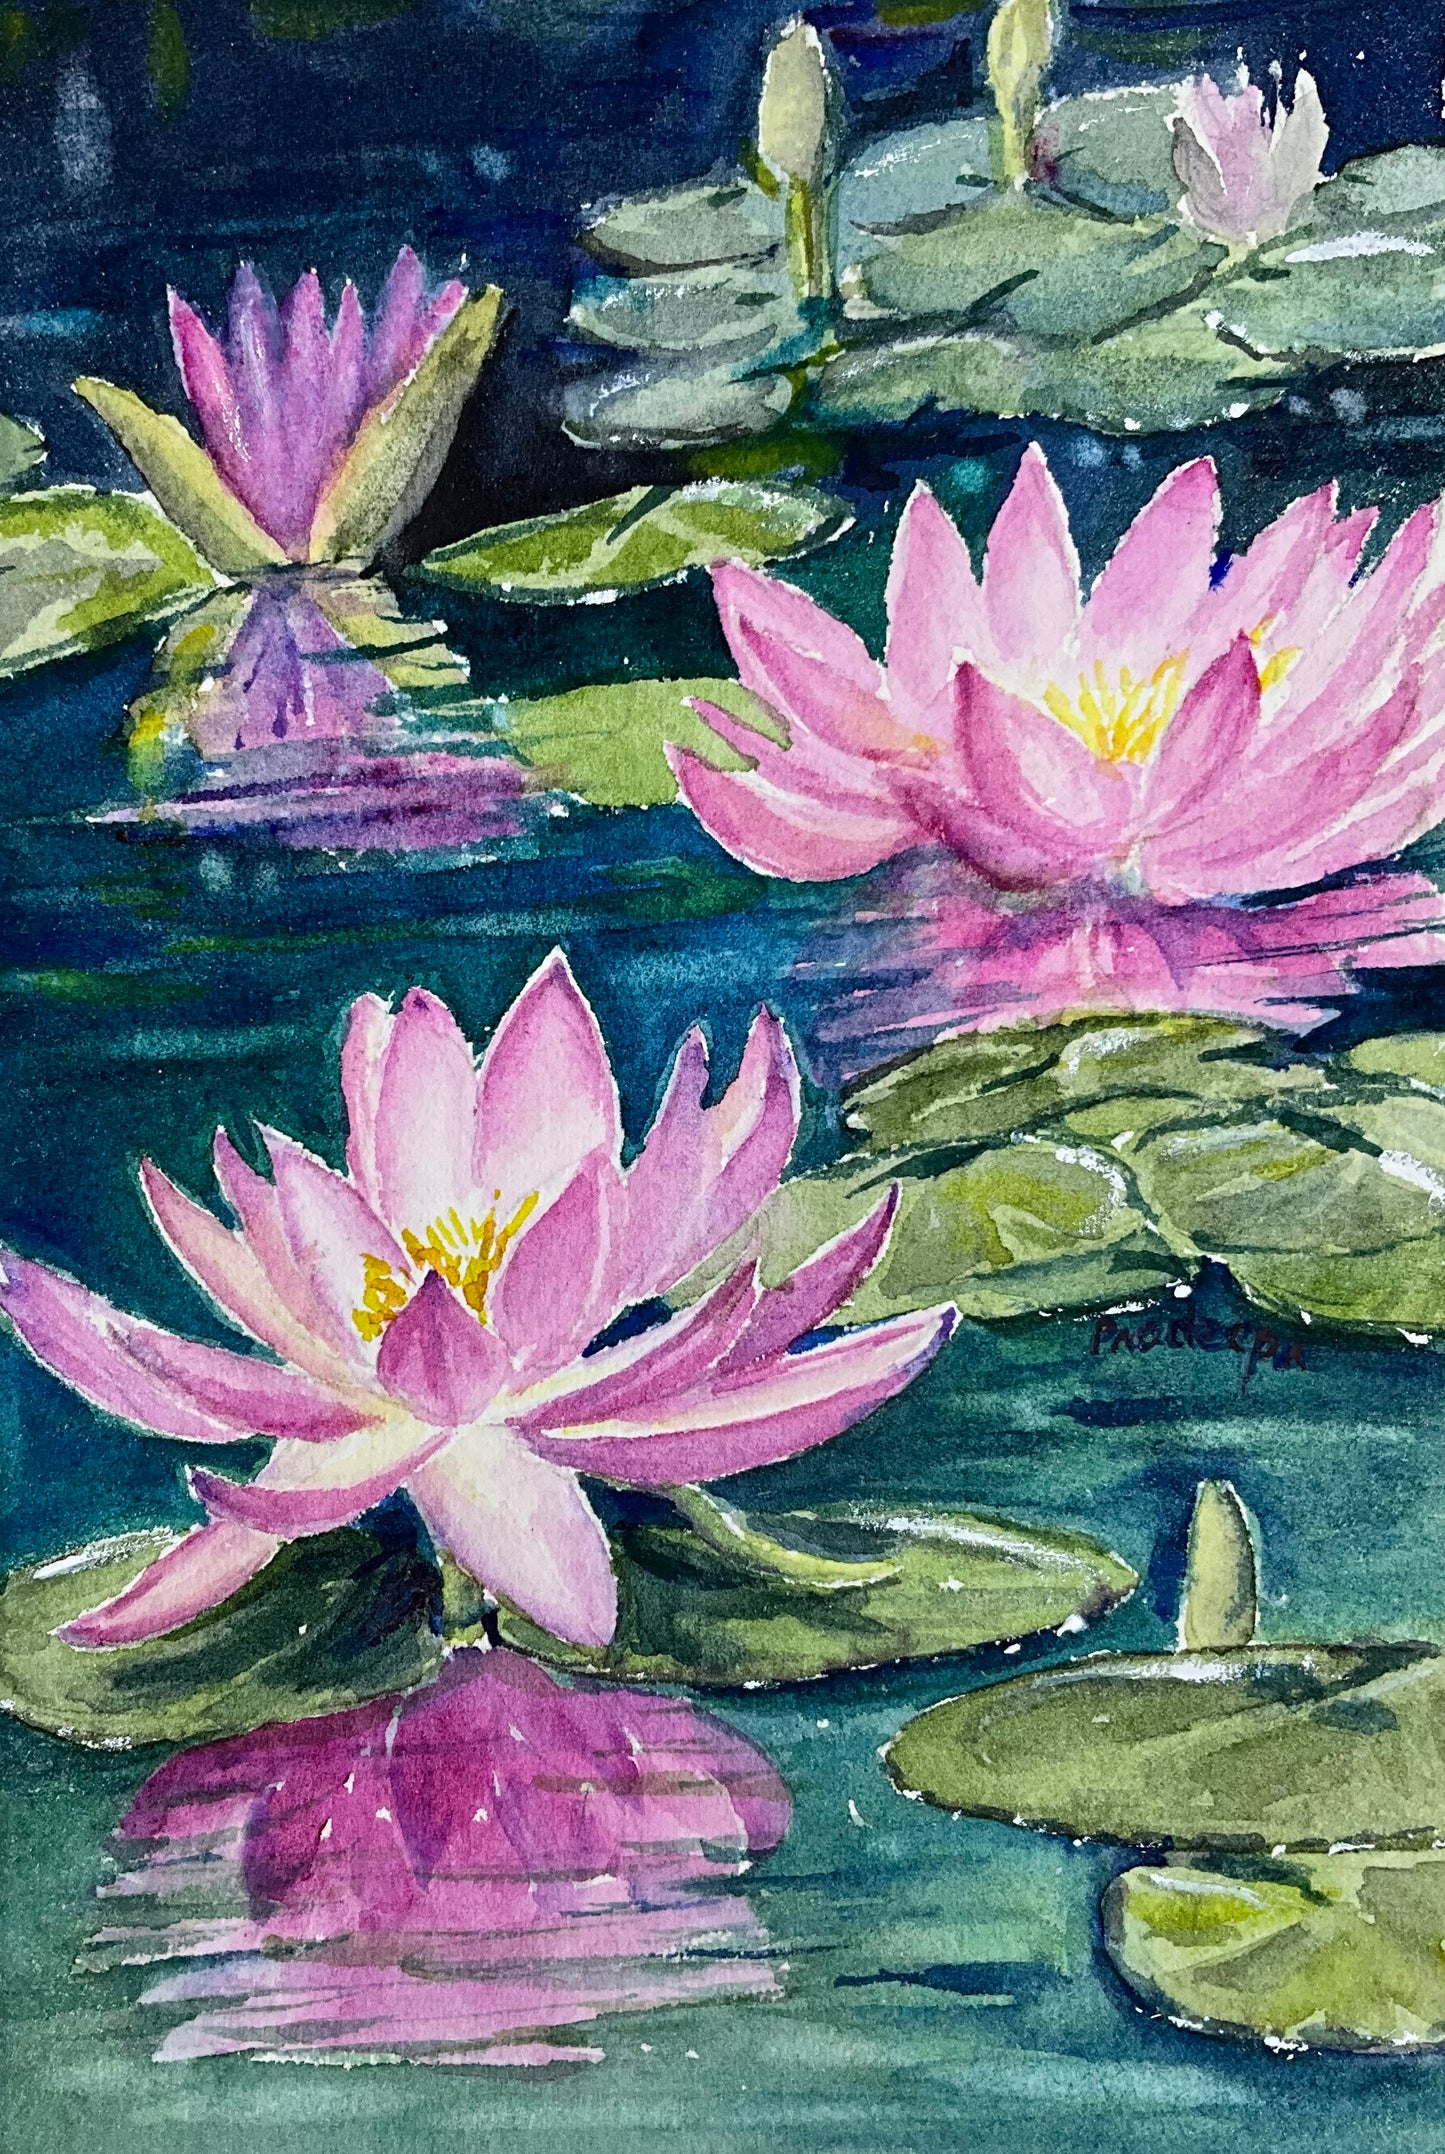 Summertime with Lilies - original watercolour painting